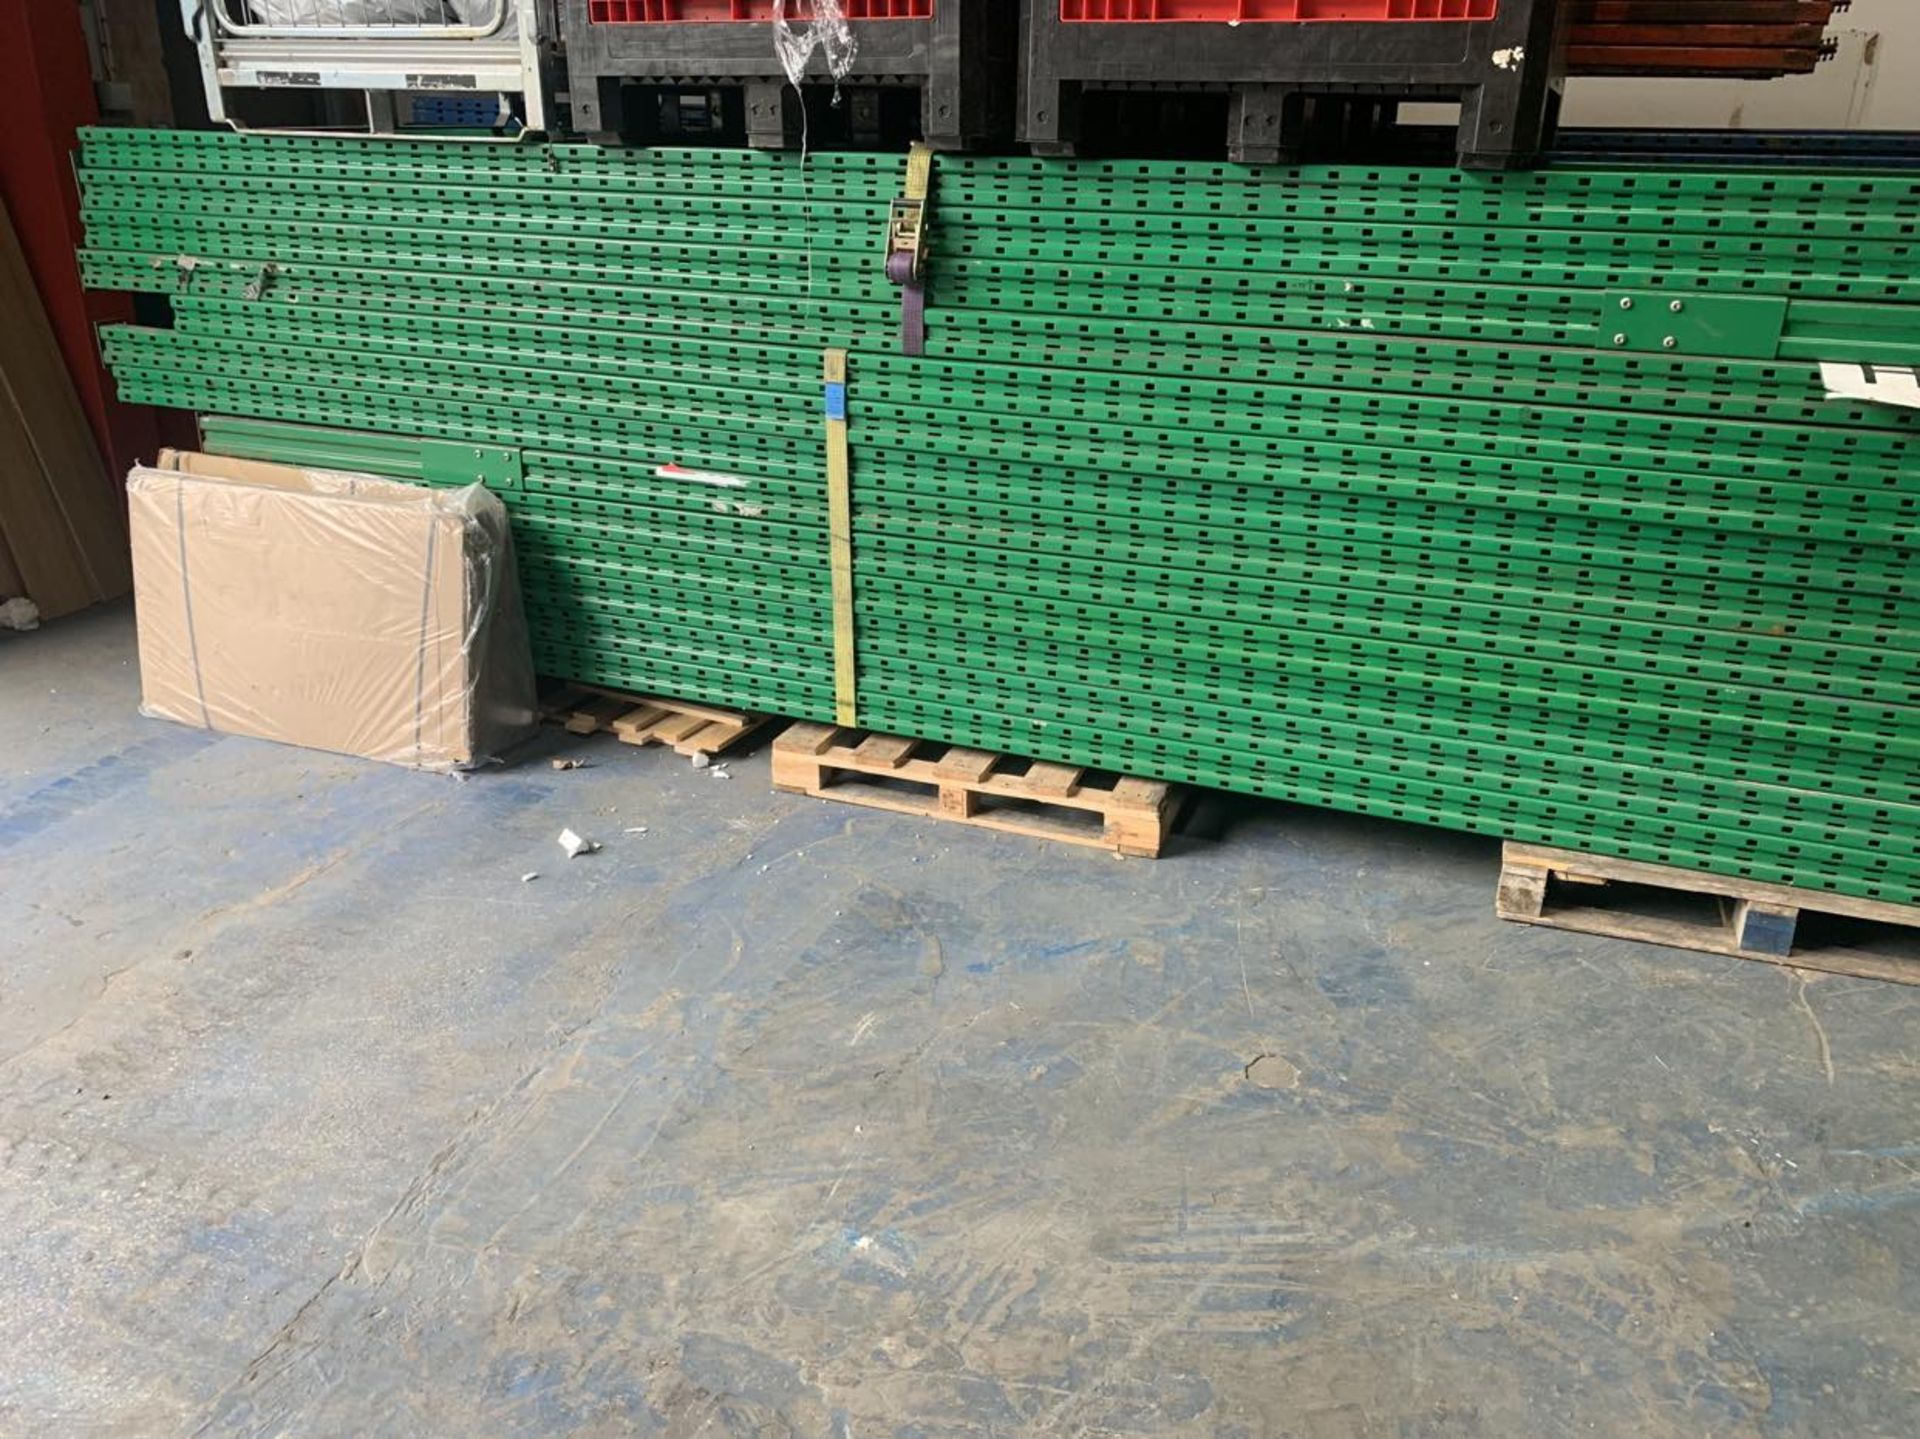 INDUSTRAIL PALLET RACKING HEAVY DUTY 10 UPRIGHTS AND 34 BEAMS - Image 2 of 2